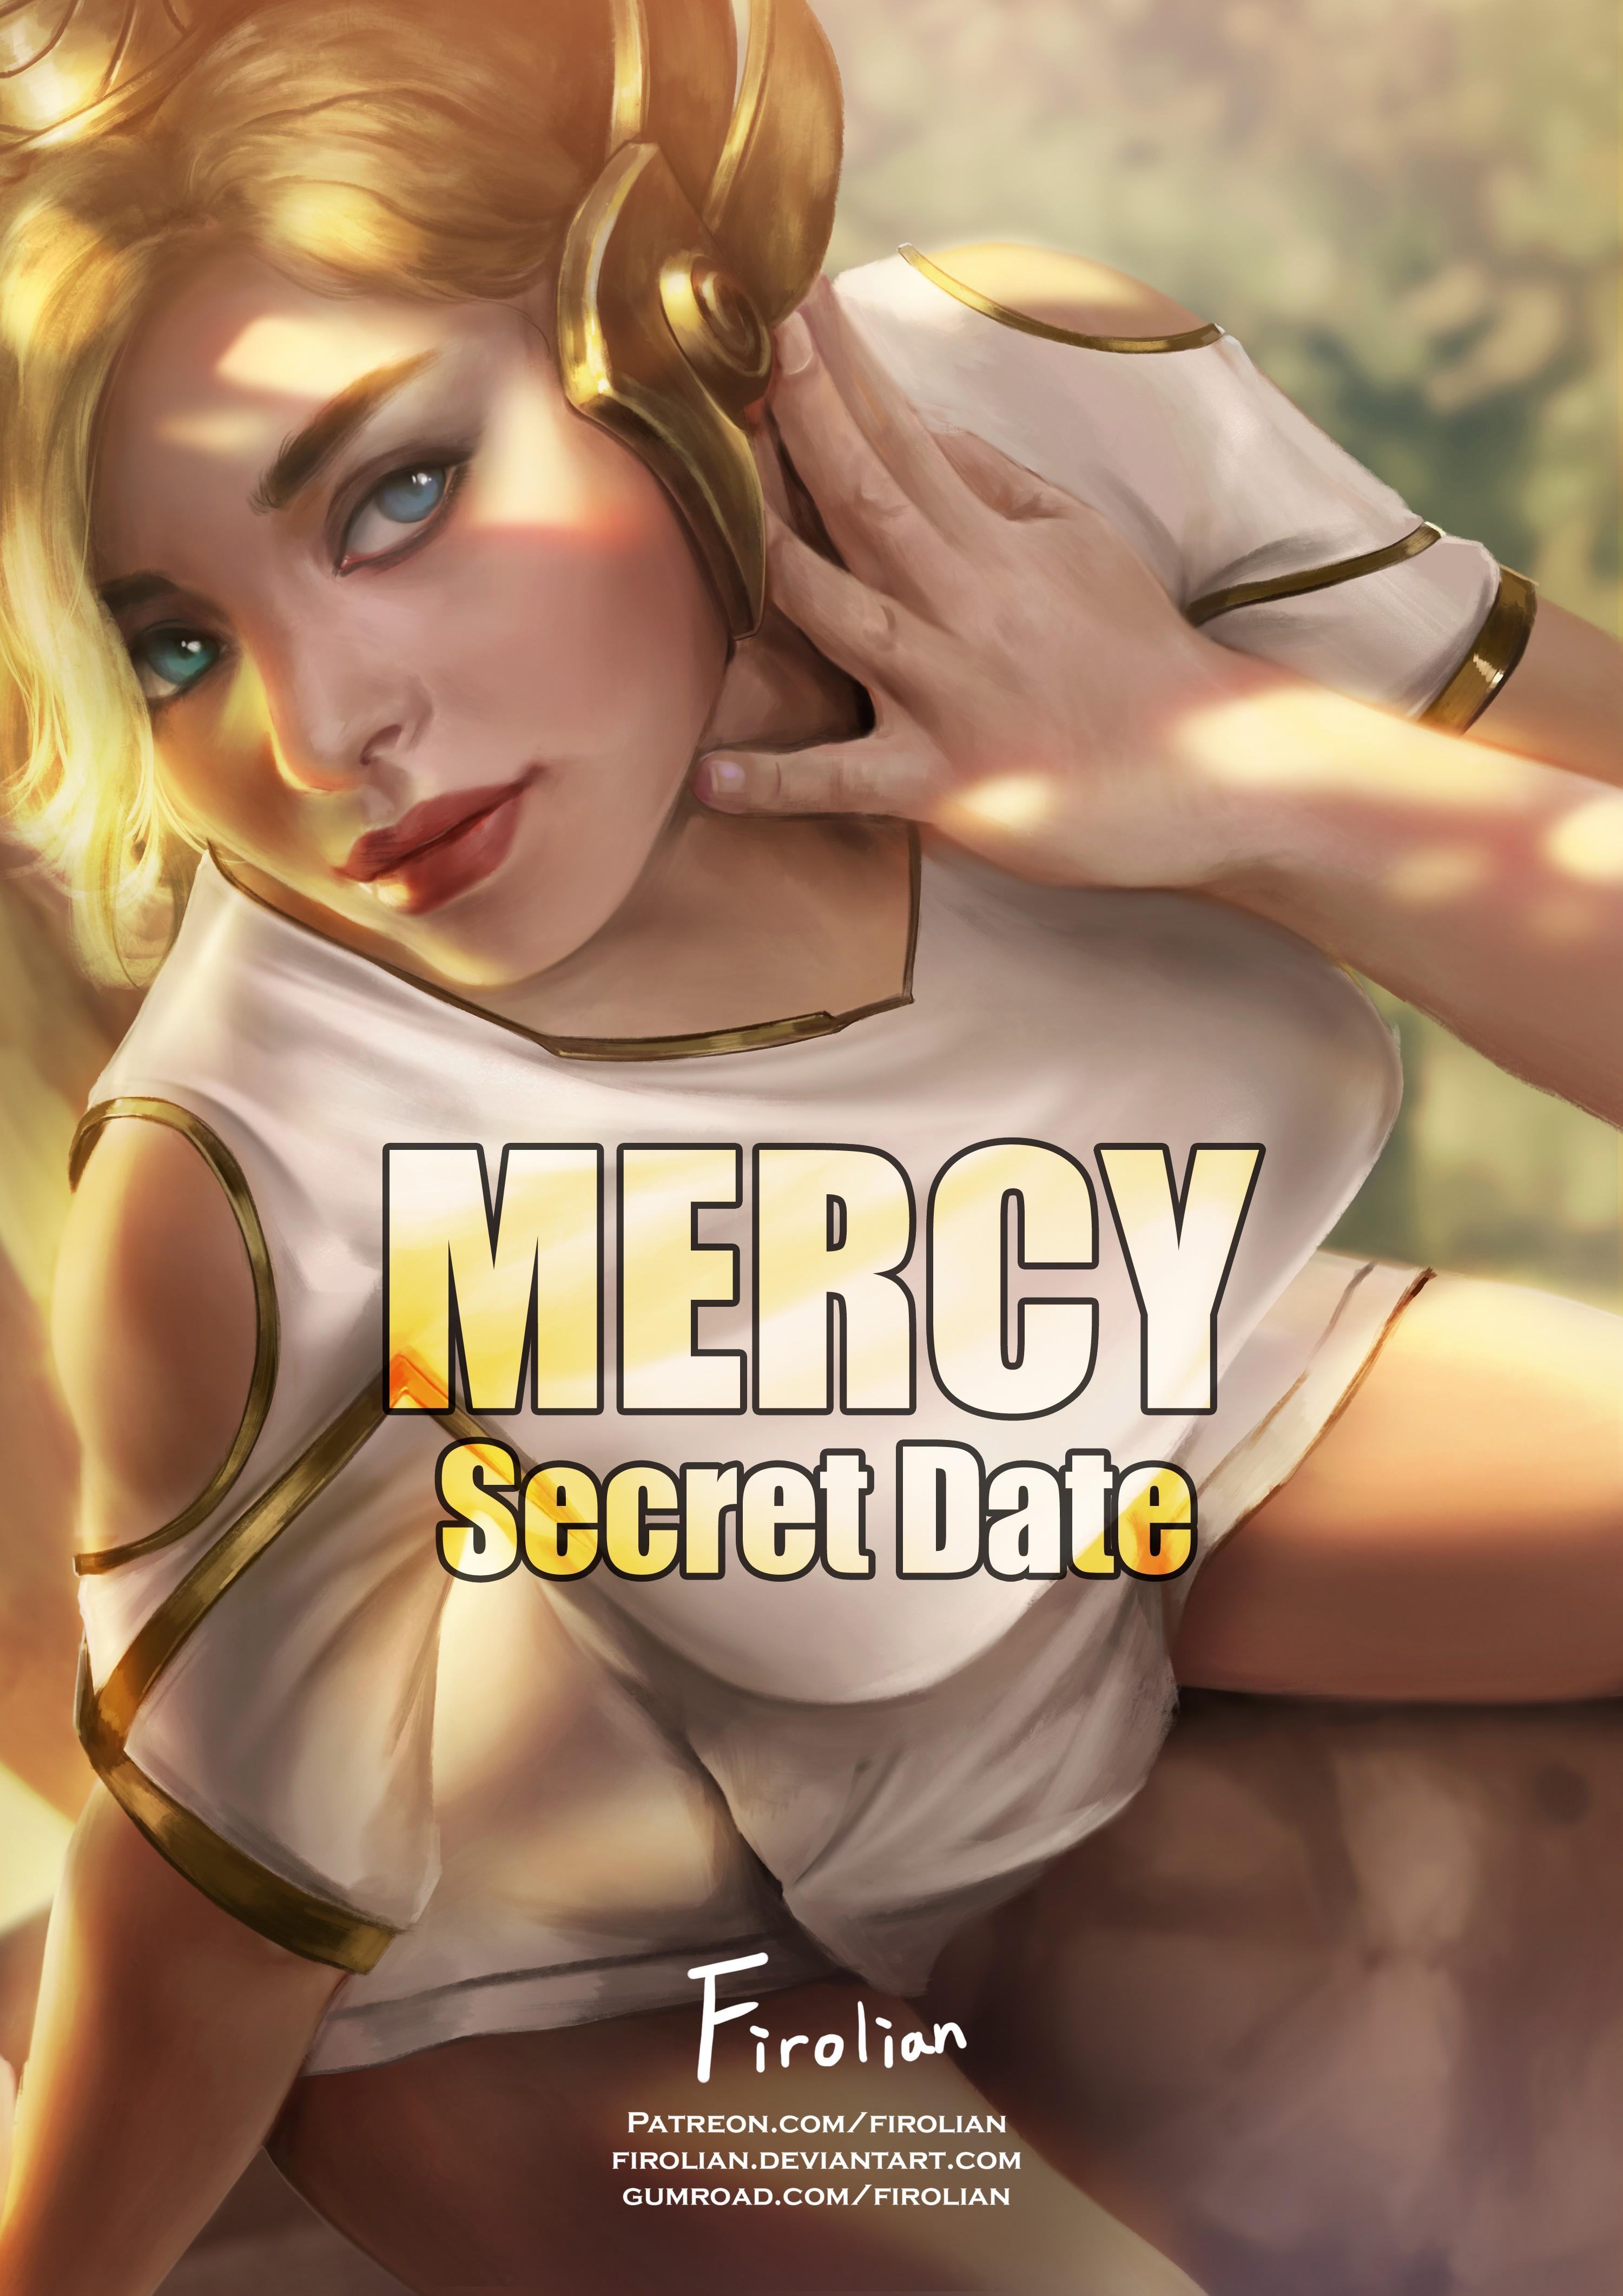 best of Winged victory mercy